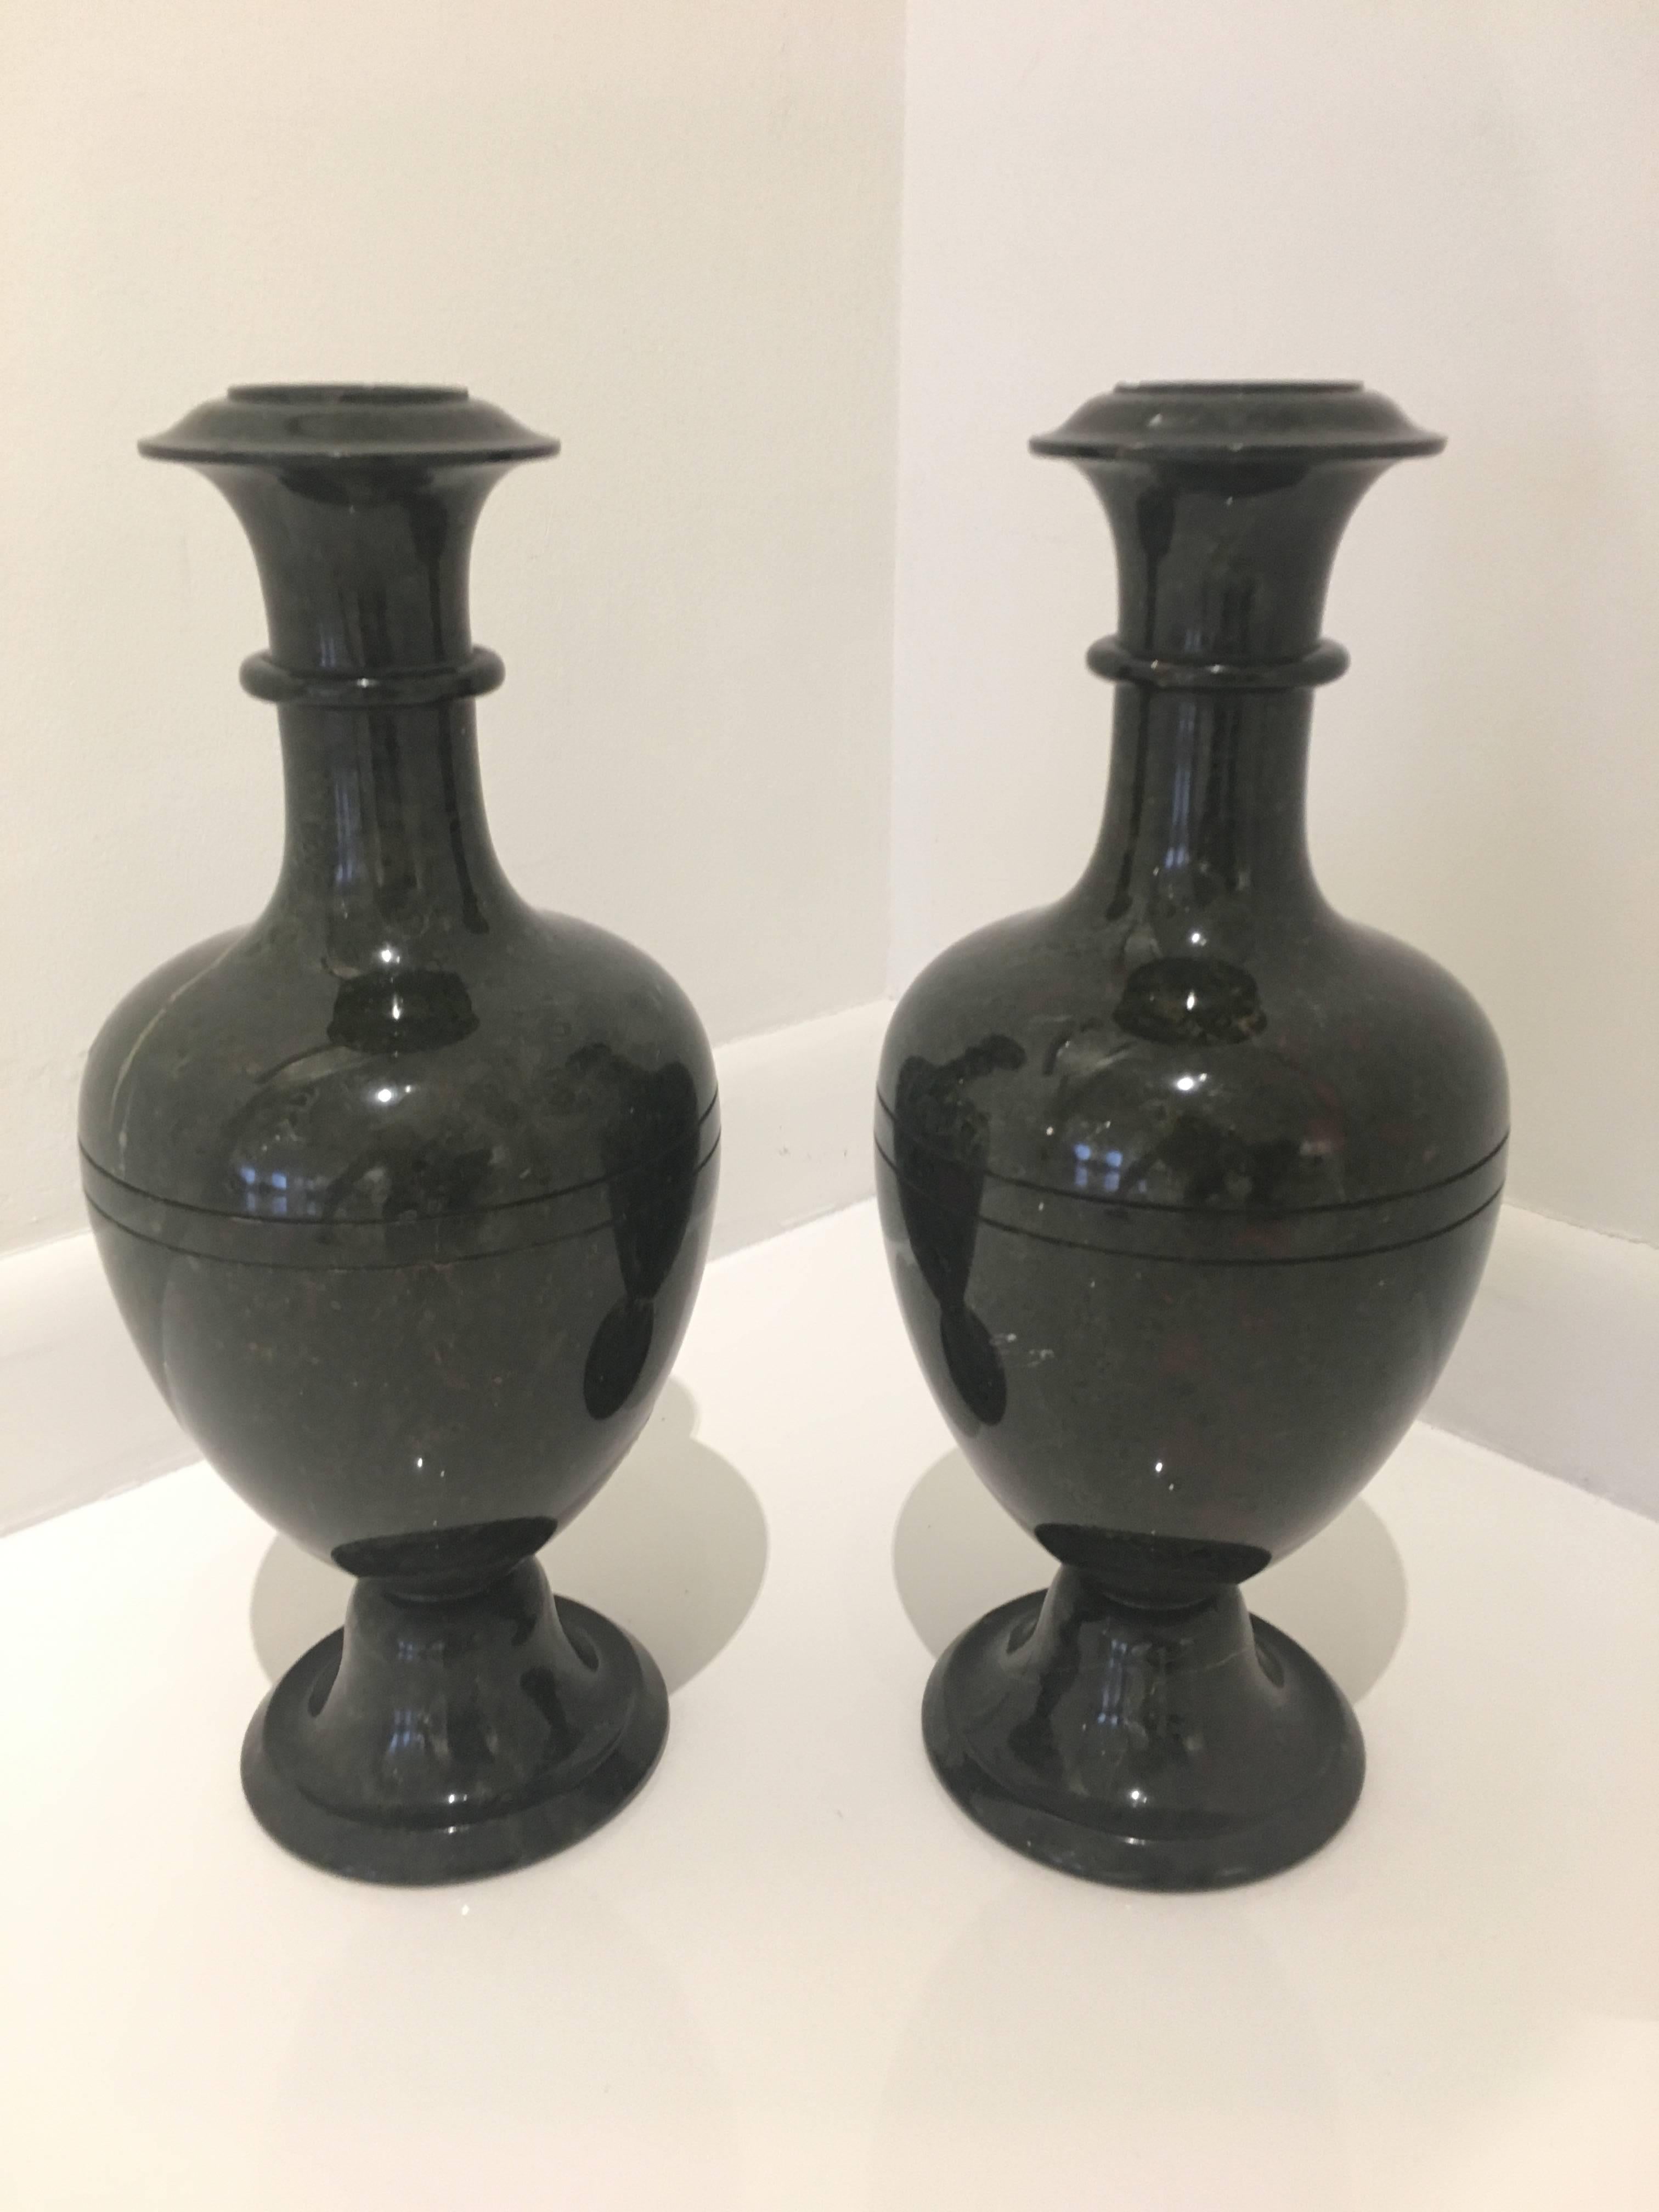 Semi-precious bloodstone carved into elegant vases. Russian, third quarter of the 19th century. A professional restoration to top lip of one vase, a few tiny flakes on both.